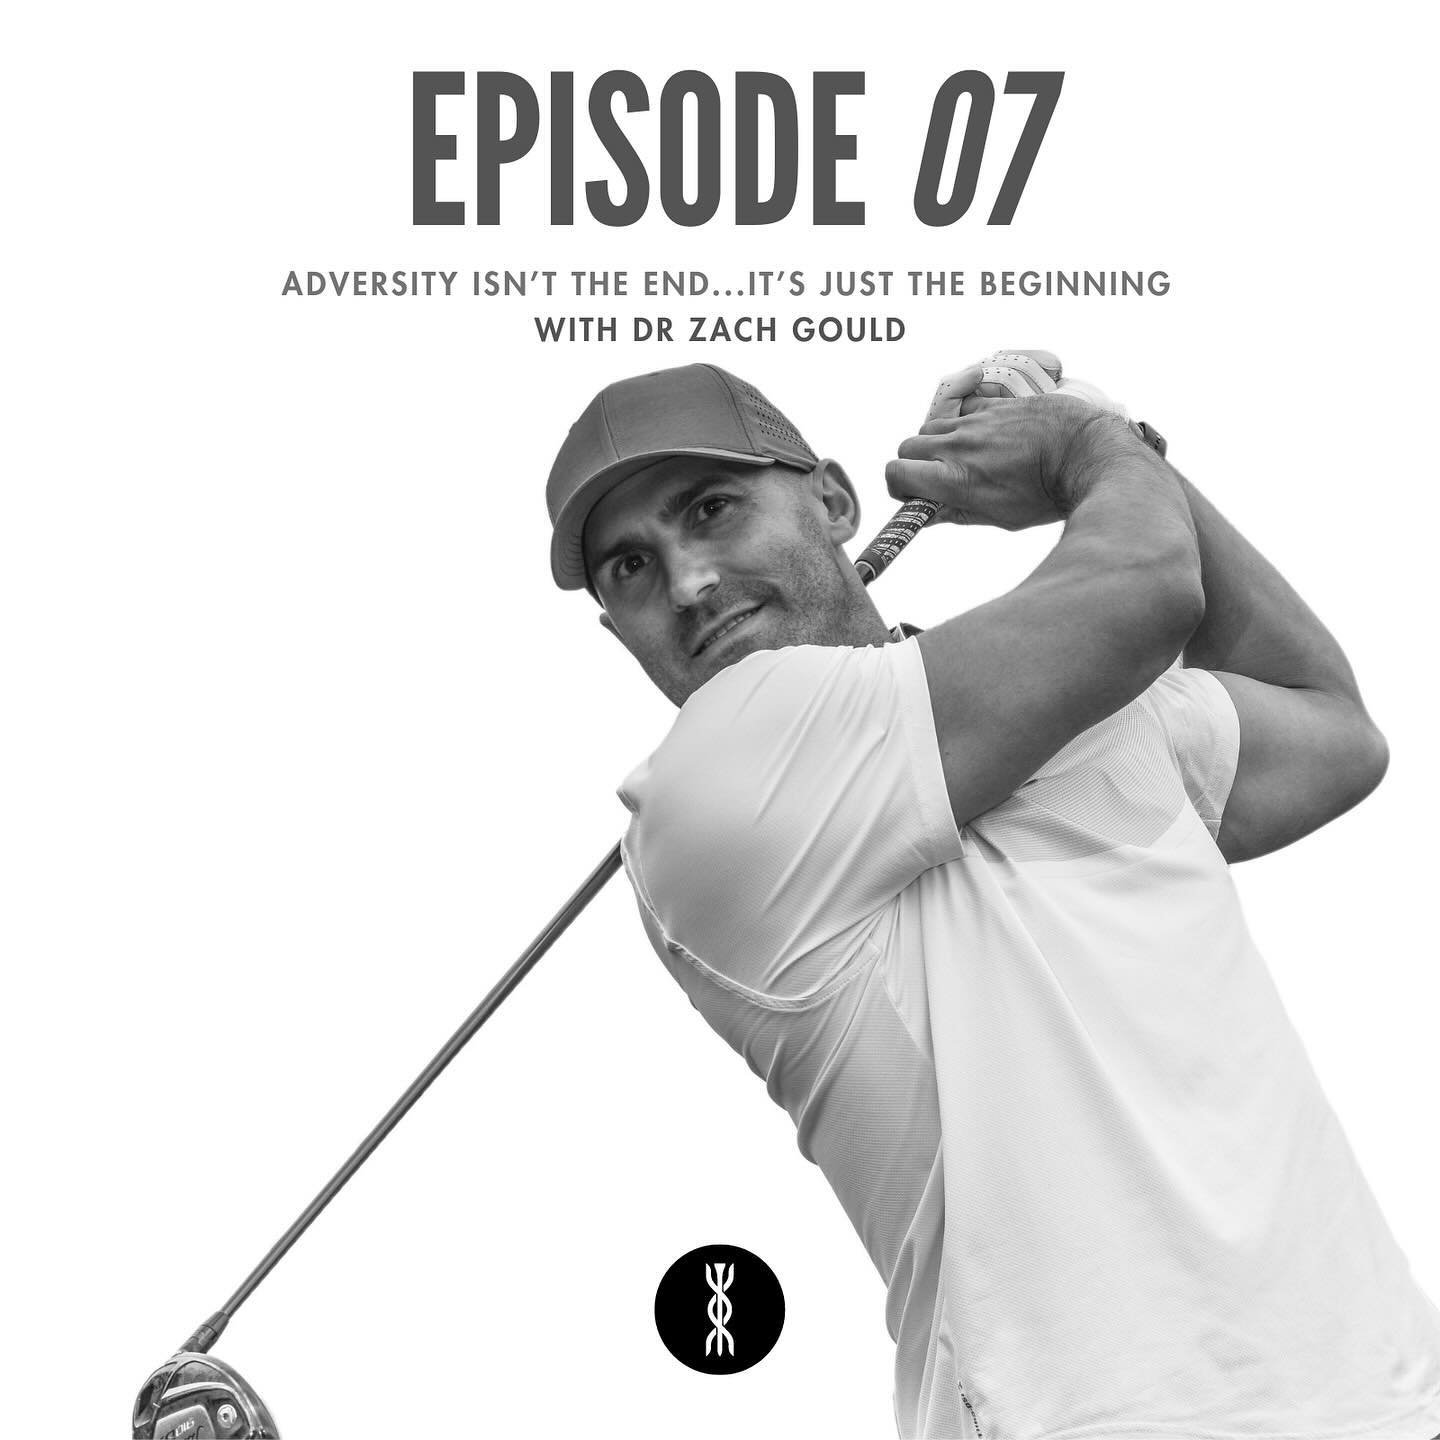 Our latest GYH podcast episode with @zachgouldgolf is now available on Spotify, YouTube and other major podcast platforms! Kris and Zach have a wide-ranging chat about Golf Fitness, overcoming setbacks in Golf and Life, playing with @rorymcilroy on t